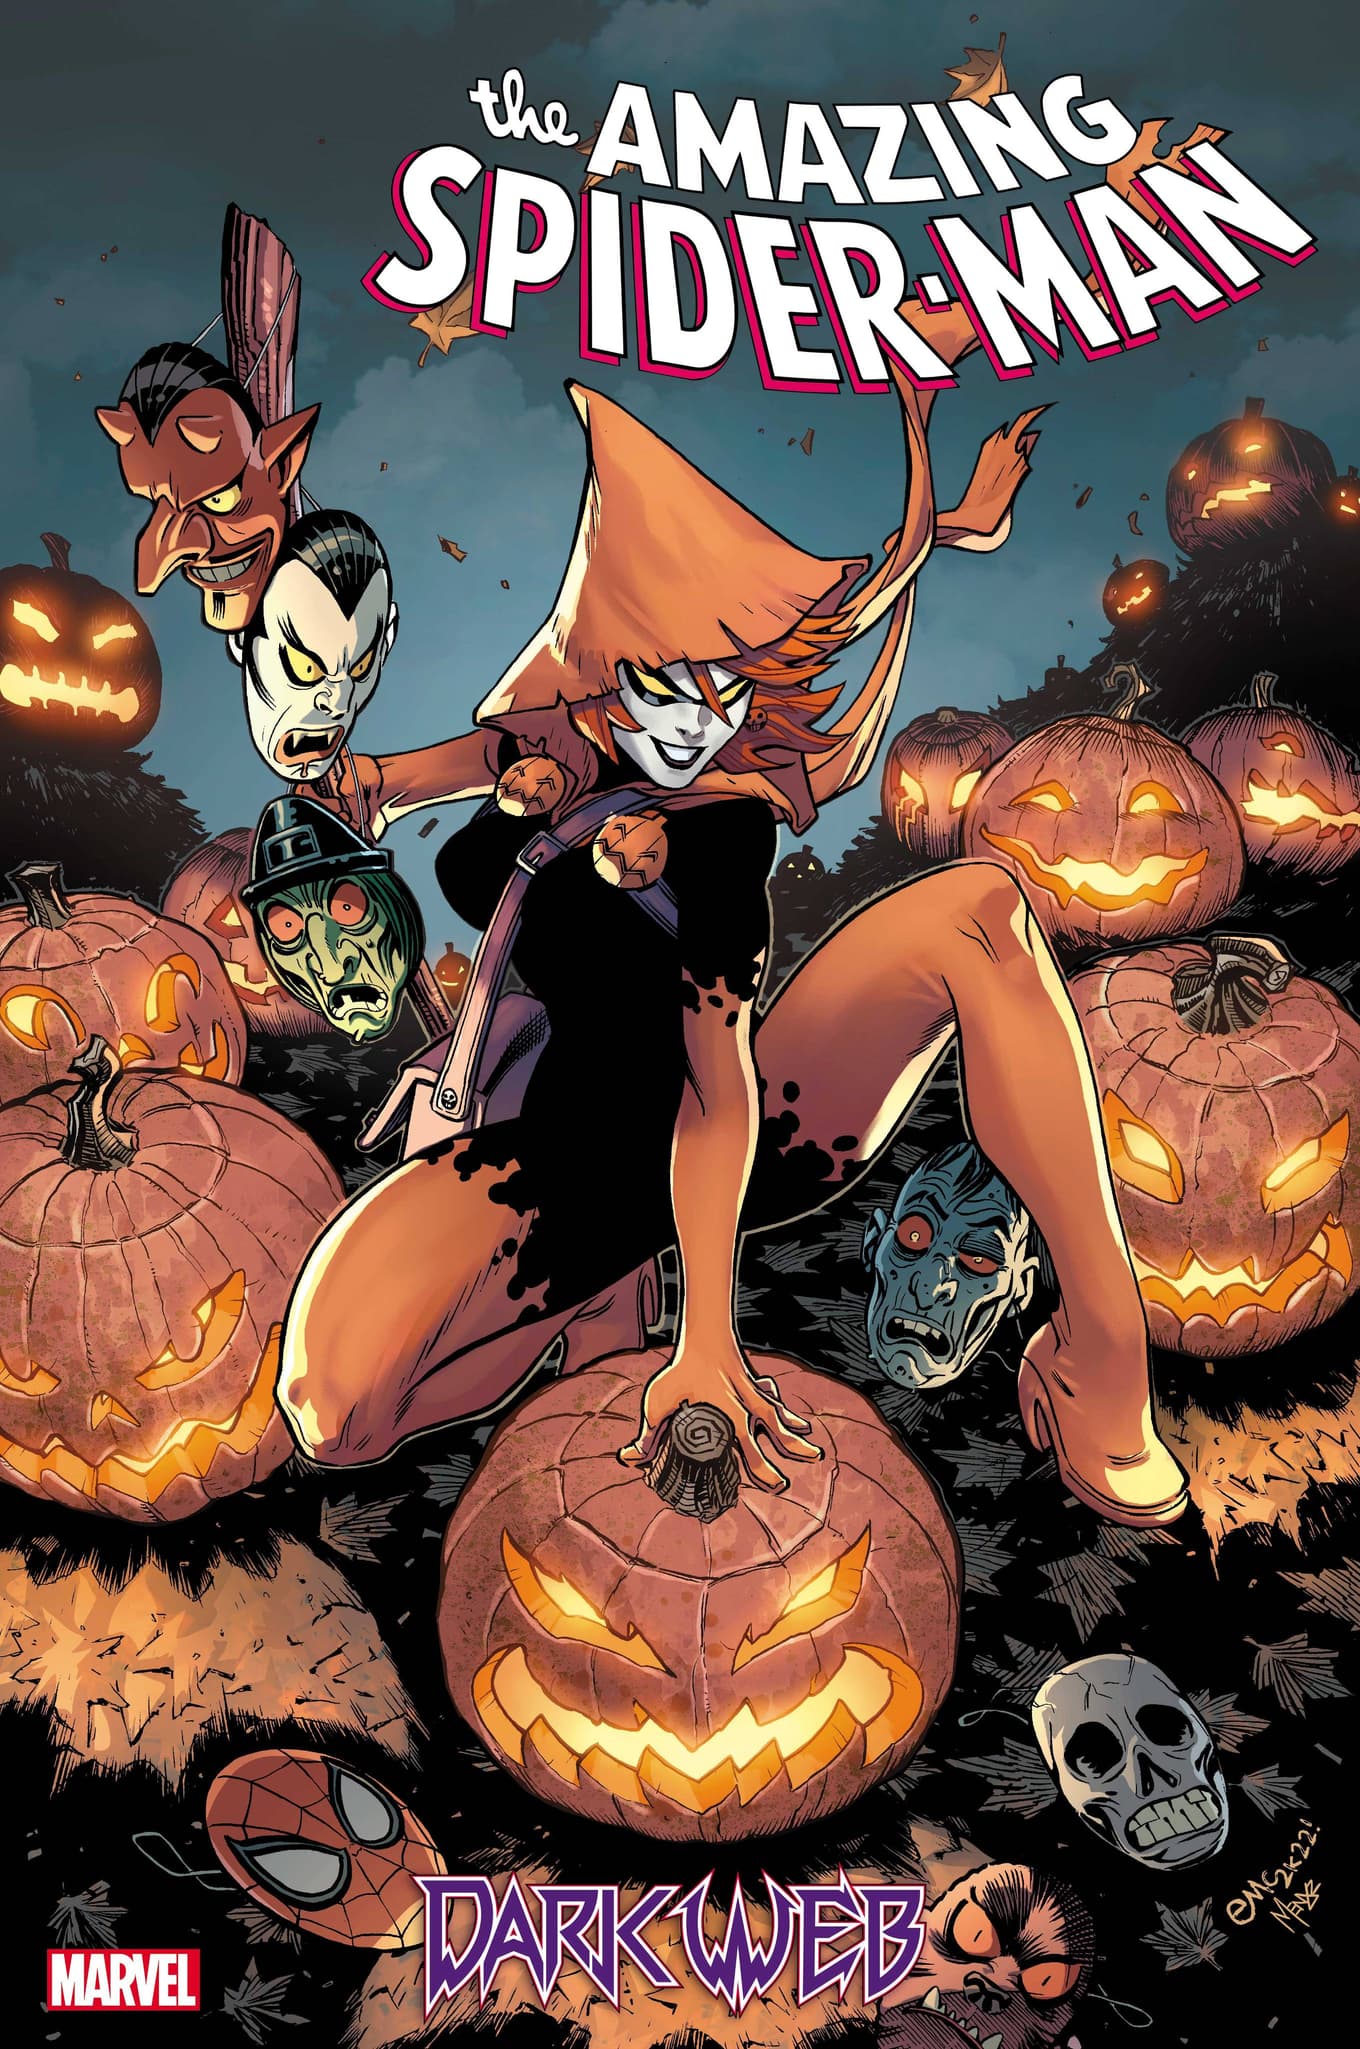 AMAZING SPIDER-MAN #14 Hallow’s Eve Promotional Image by Ed McGuinness